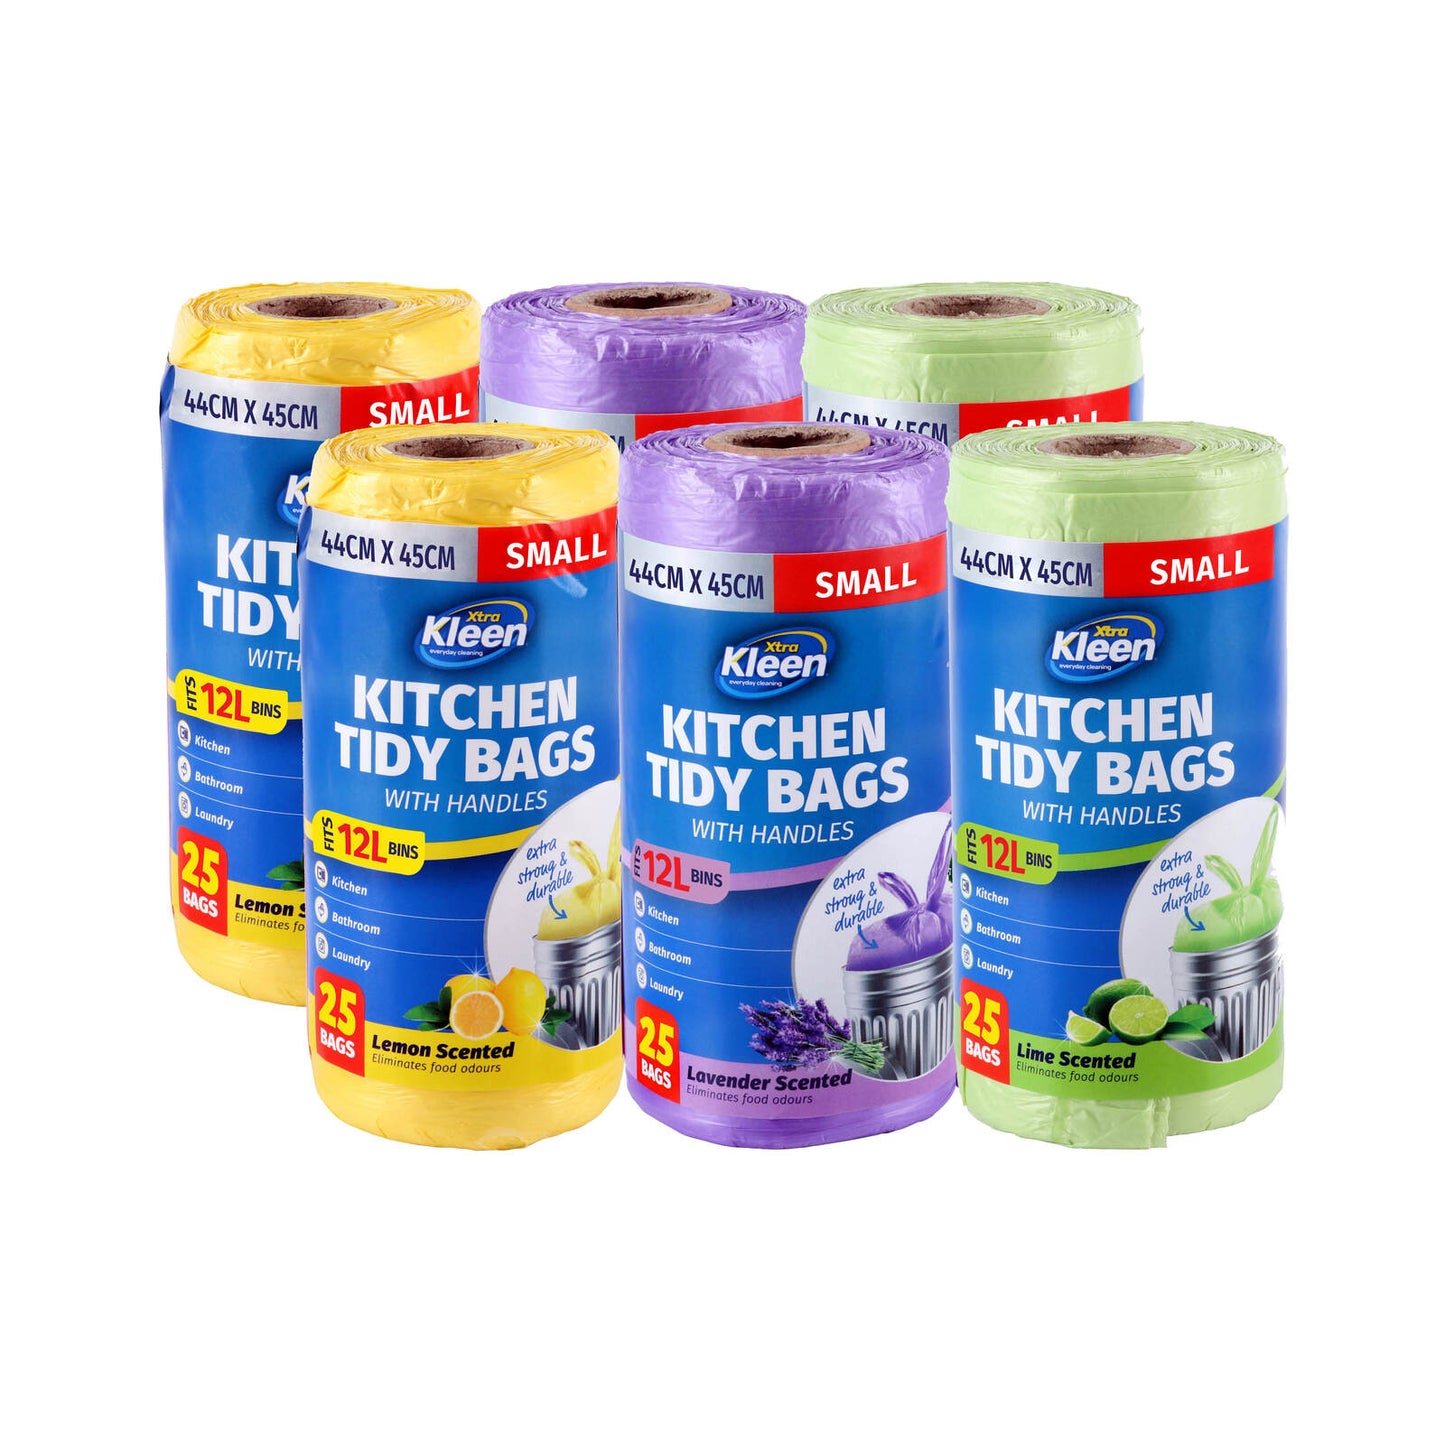 Xtra Kleen 600PCE Scented Kitchen Tidy 12L Garbage Bag Handles Small 44 x 45cm